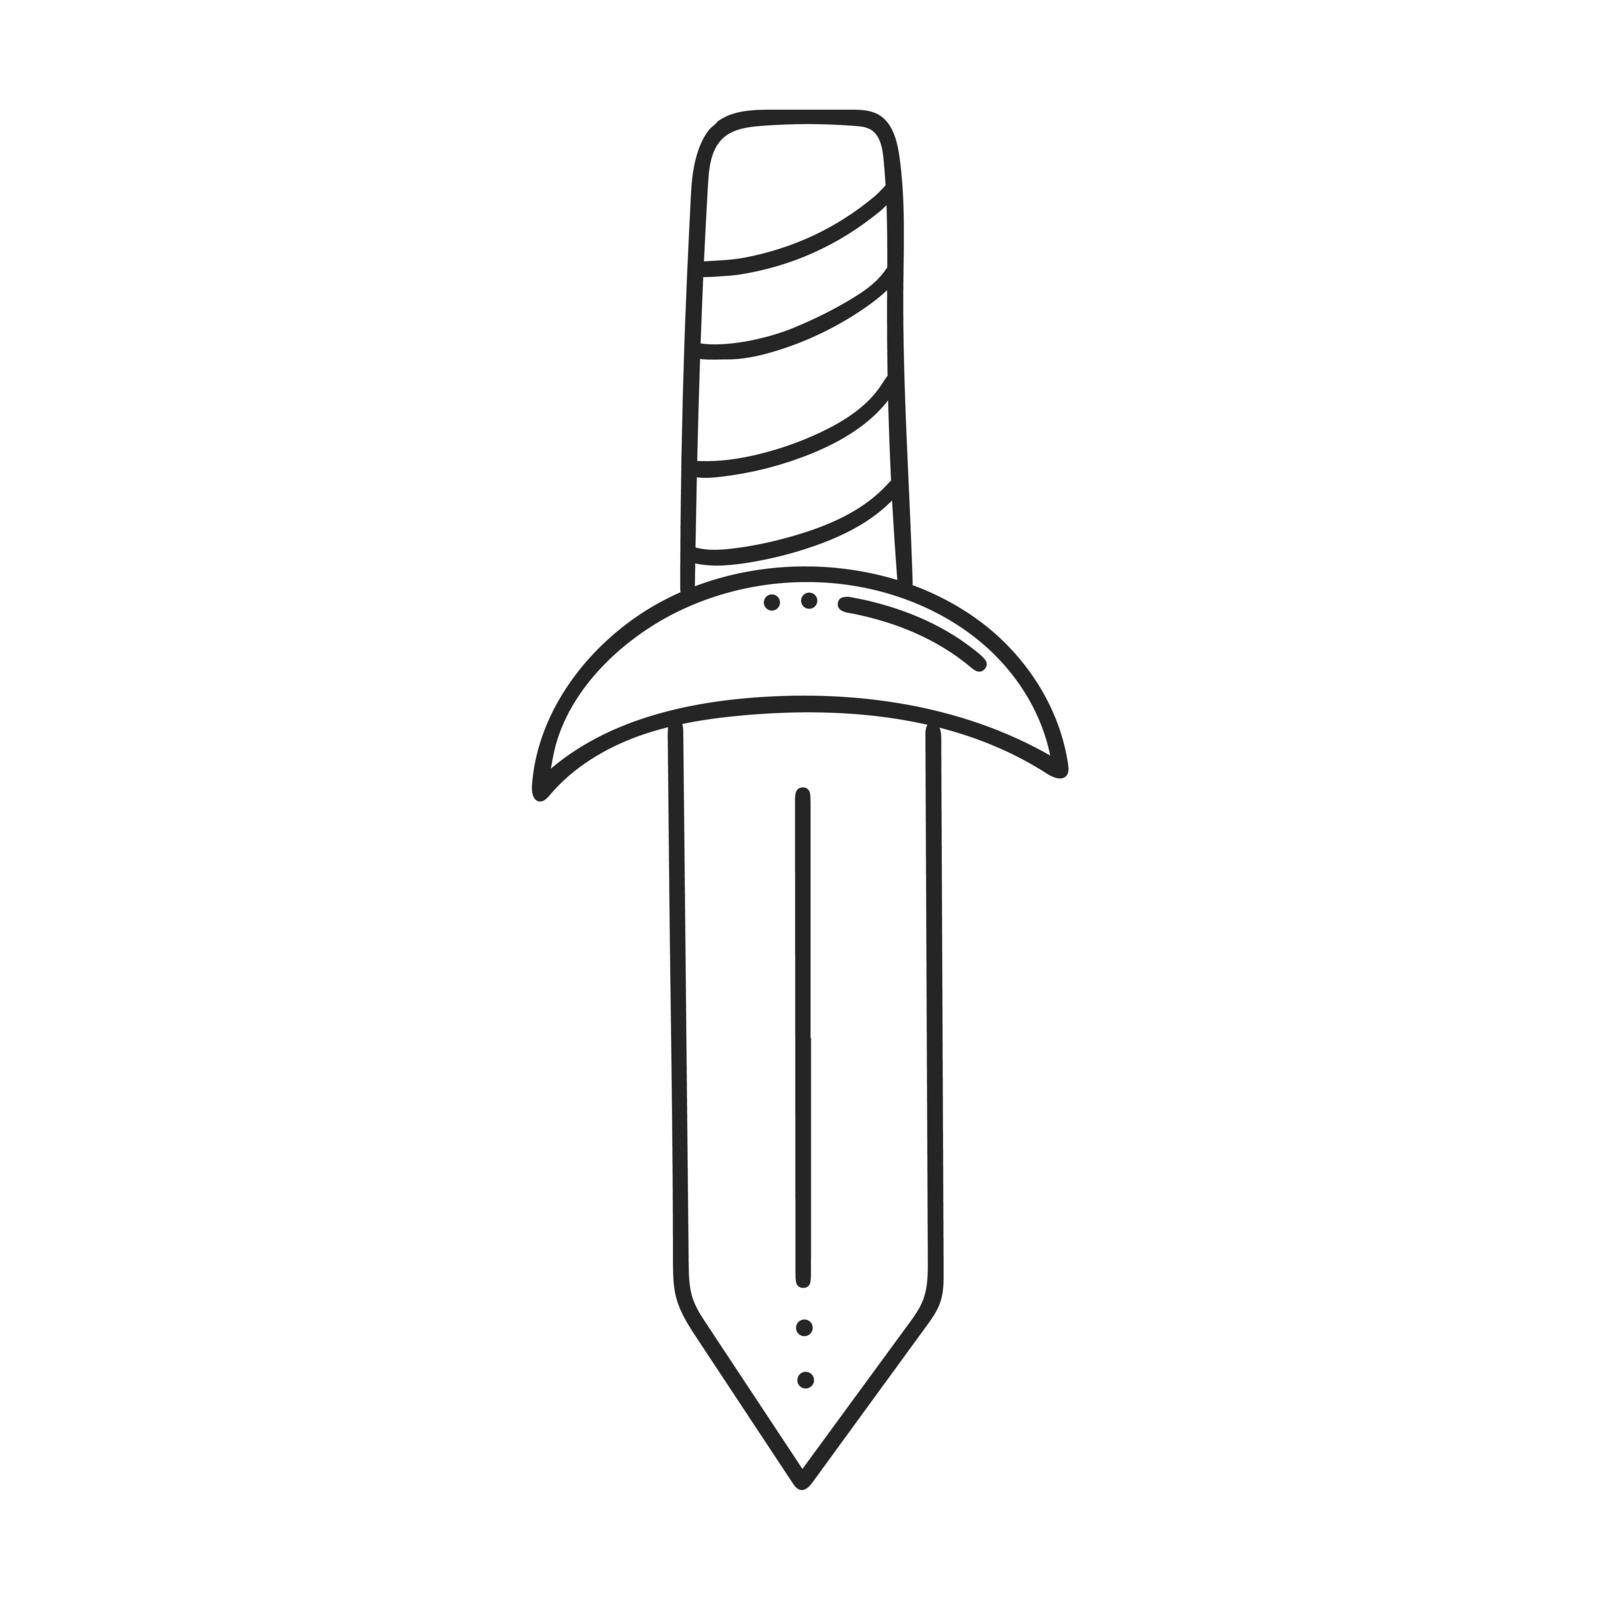 Knife simple doodle illustration. Contour image cold weapon with sharp metal blade. Kitchen turn tool. Ritual item for spells and sorcery. Isolated vector